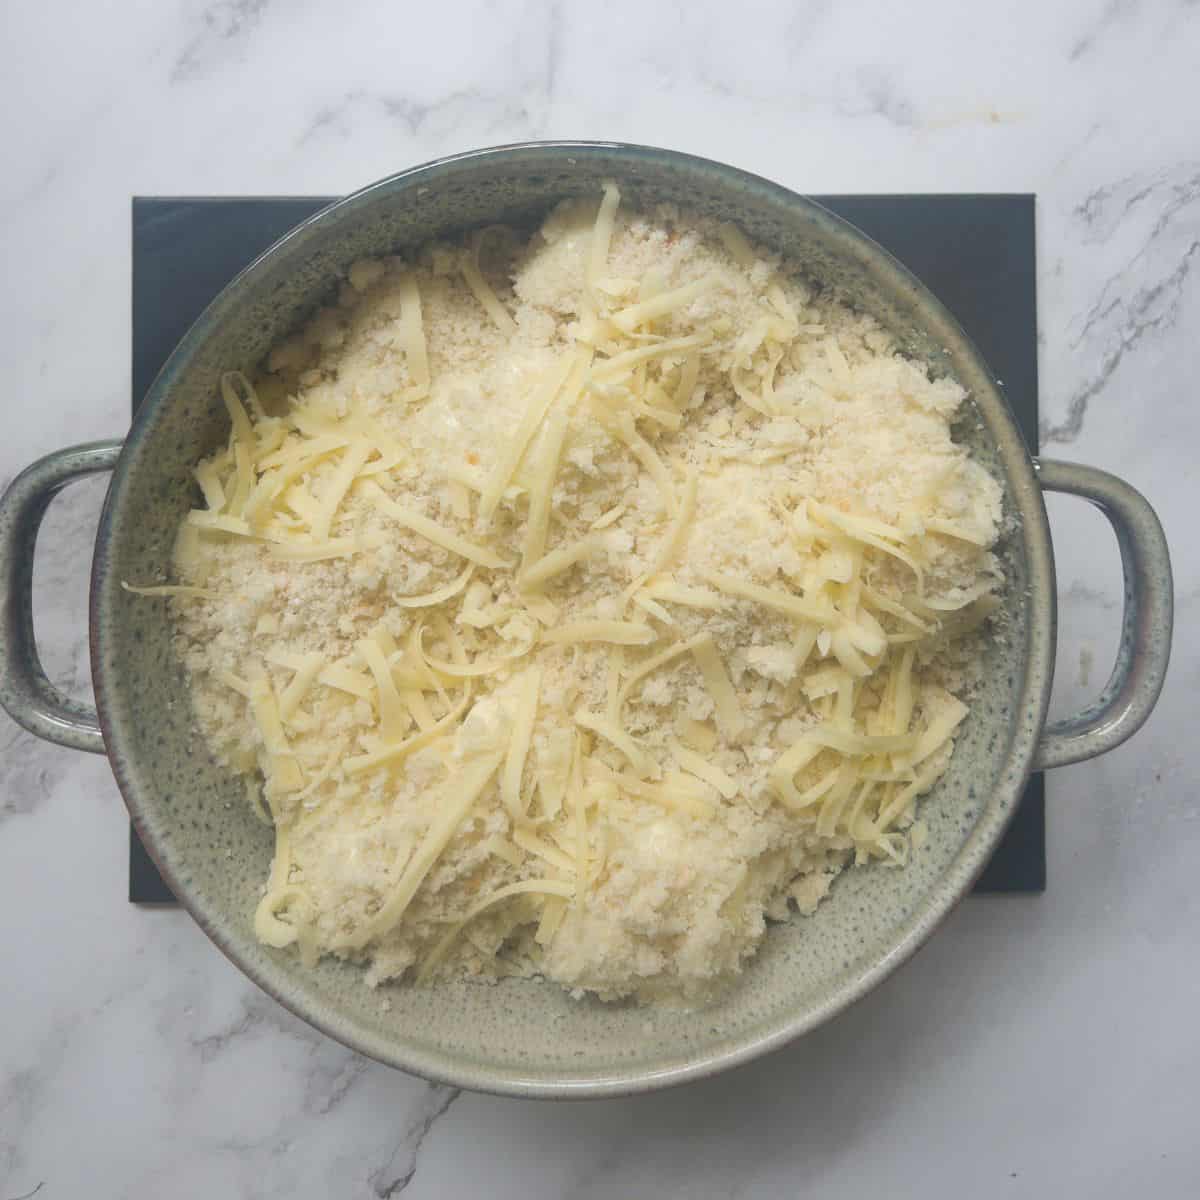 cauliflower cheese in a casserole dish before it has been baked.